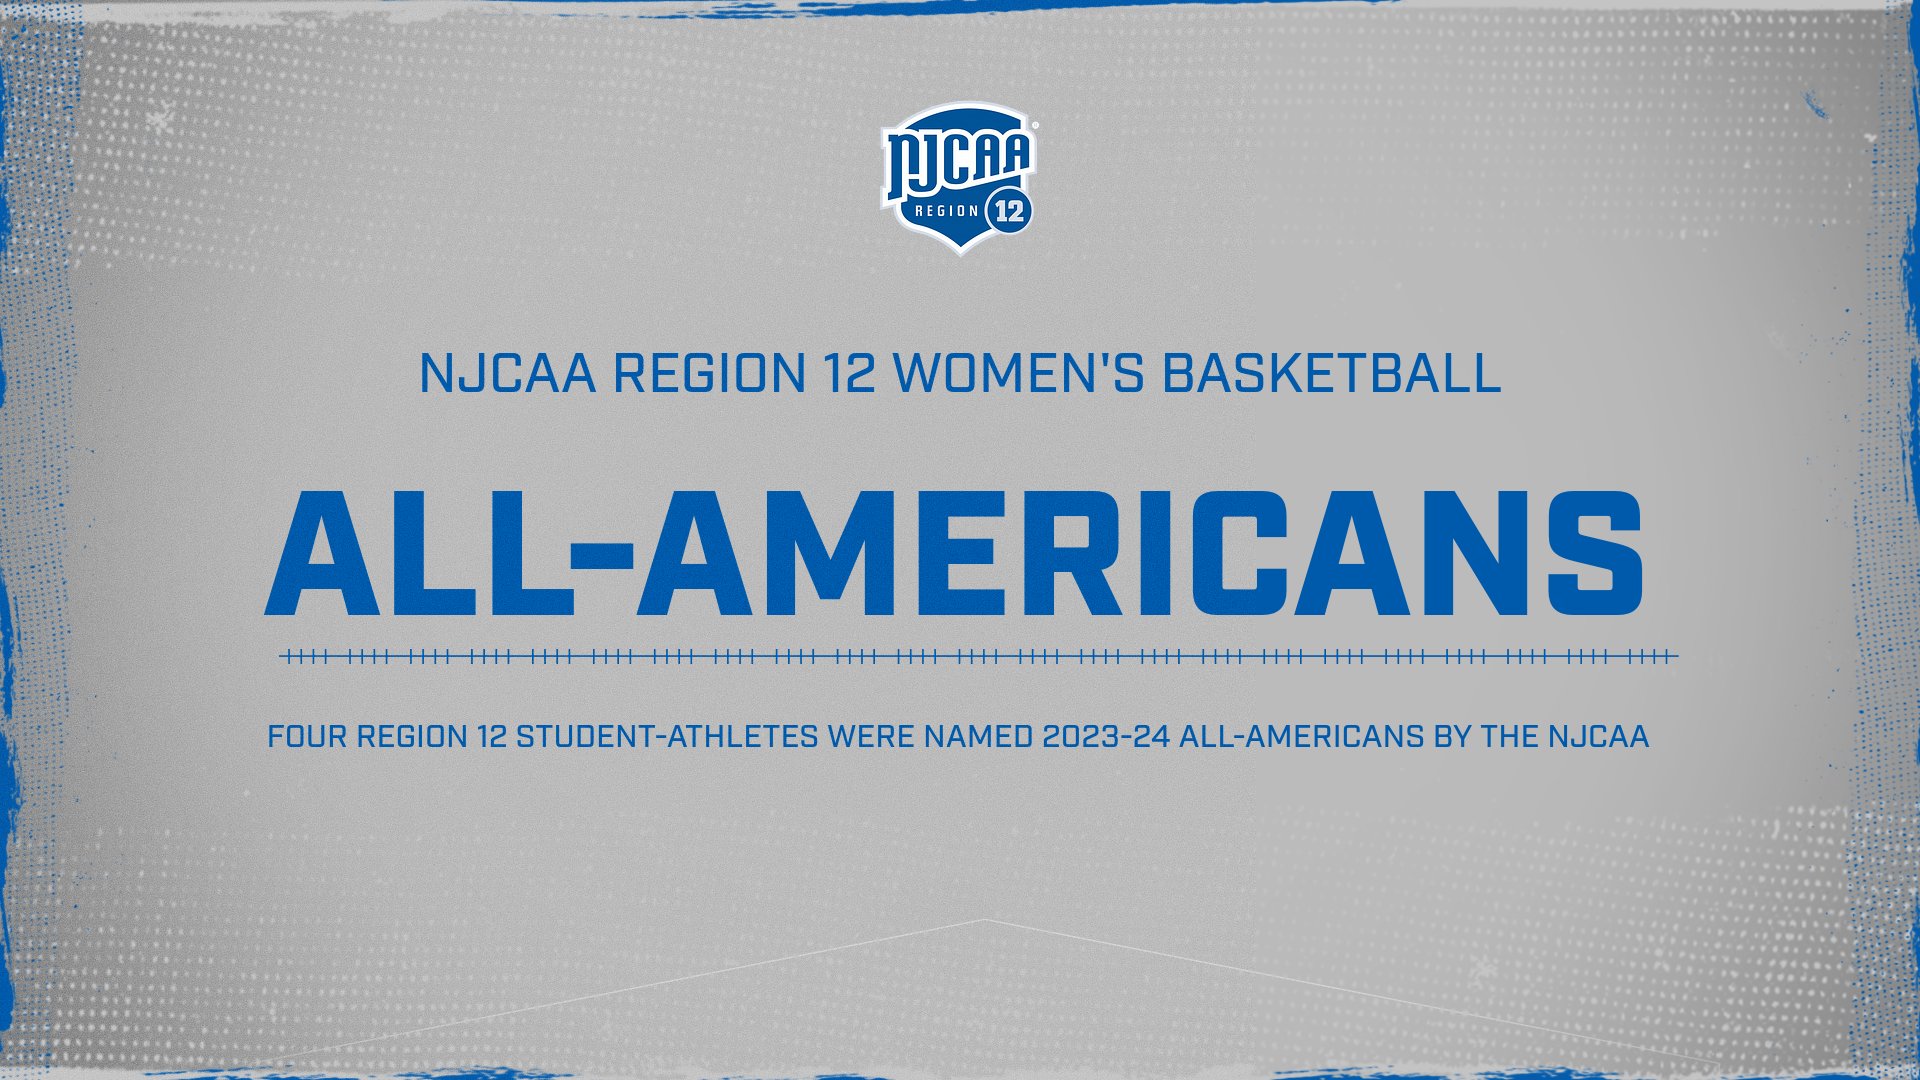 Women’s Basketball All-Americans Announced, Four Region 12 Student-Athletes Recognized